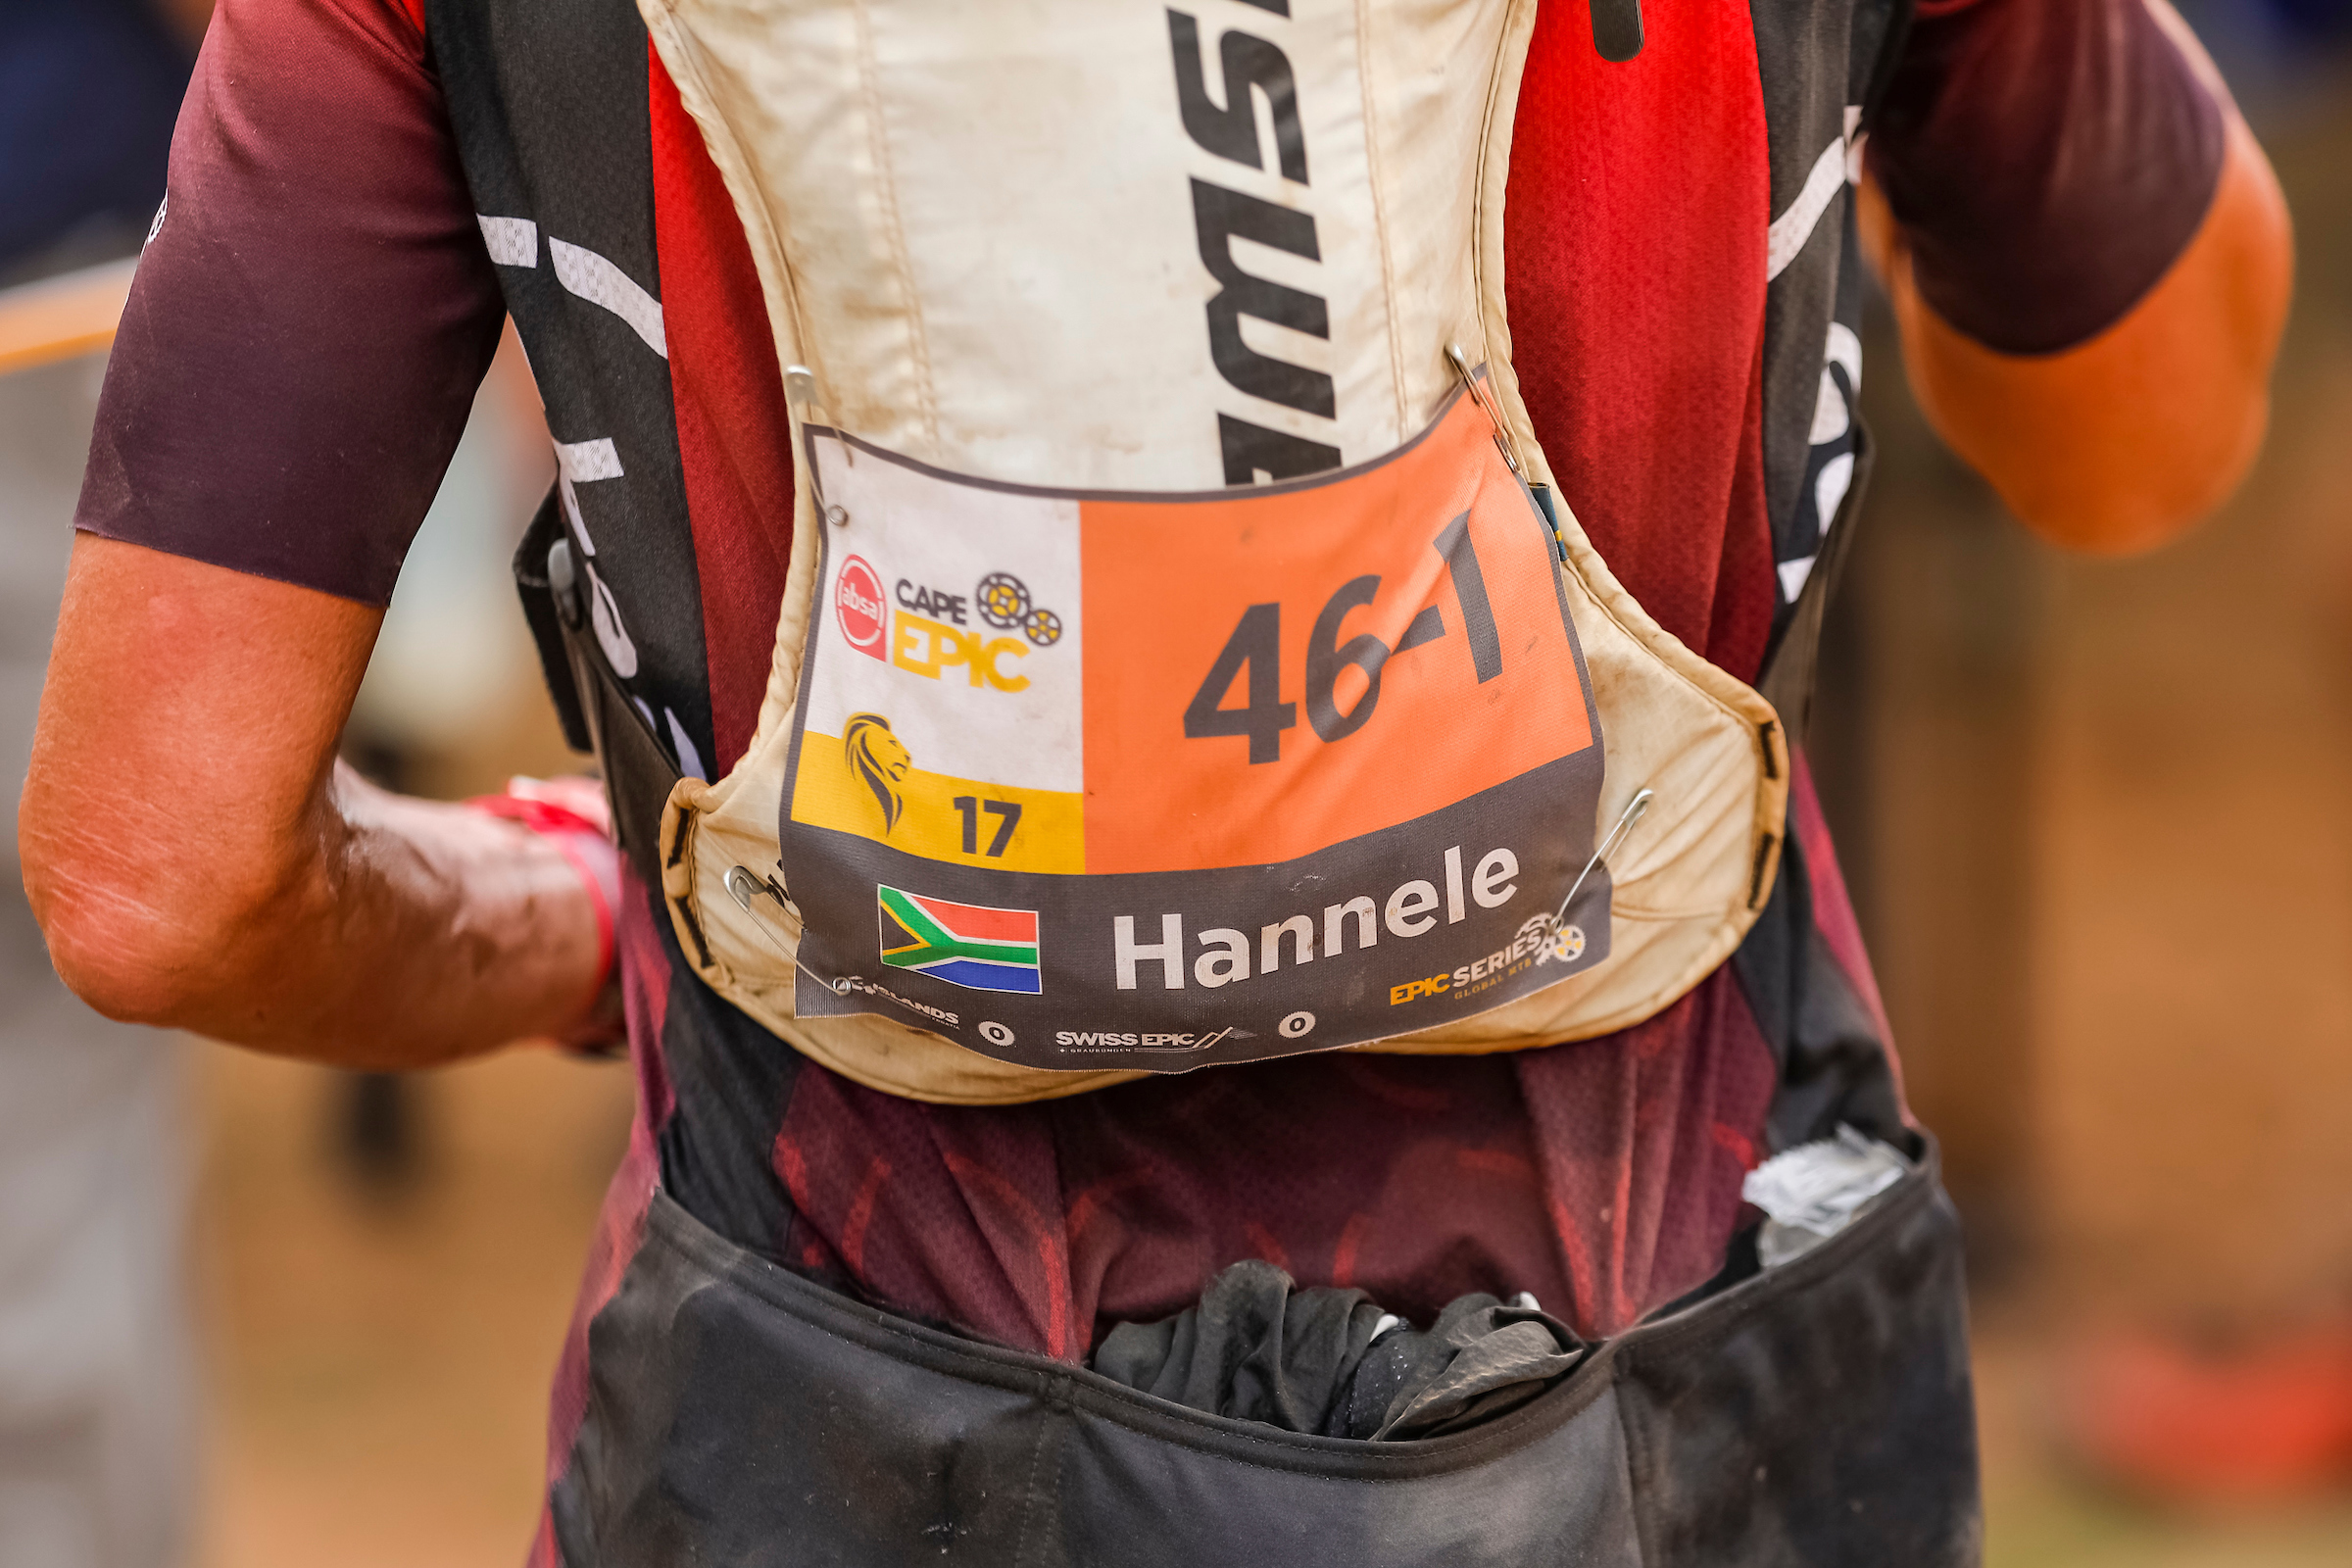 Photo by Dominic Barnardt/Cape Epic